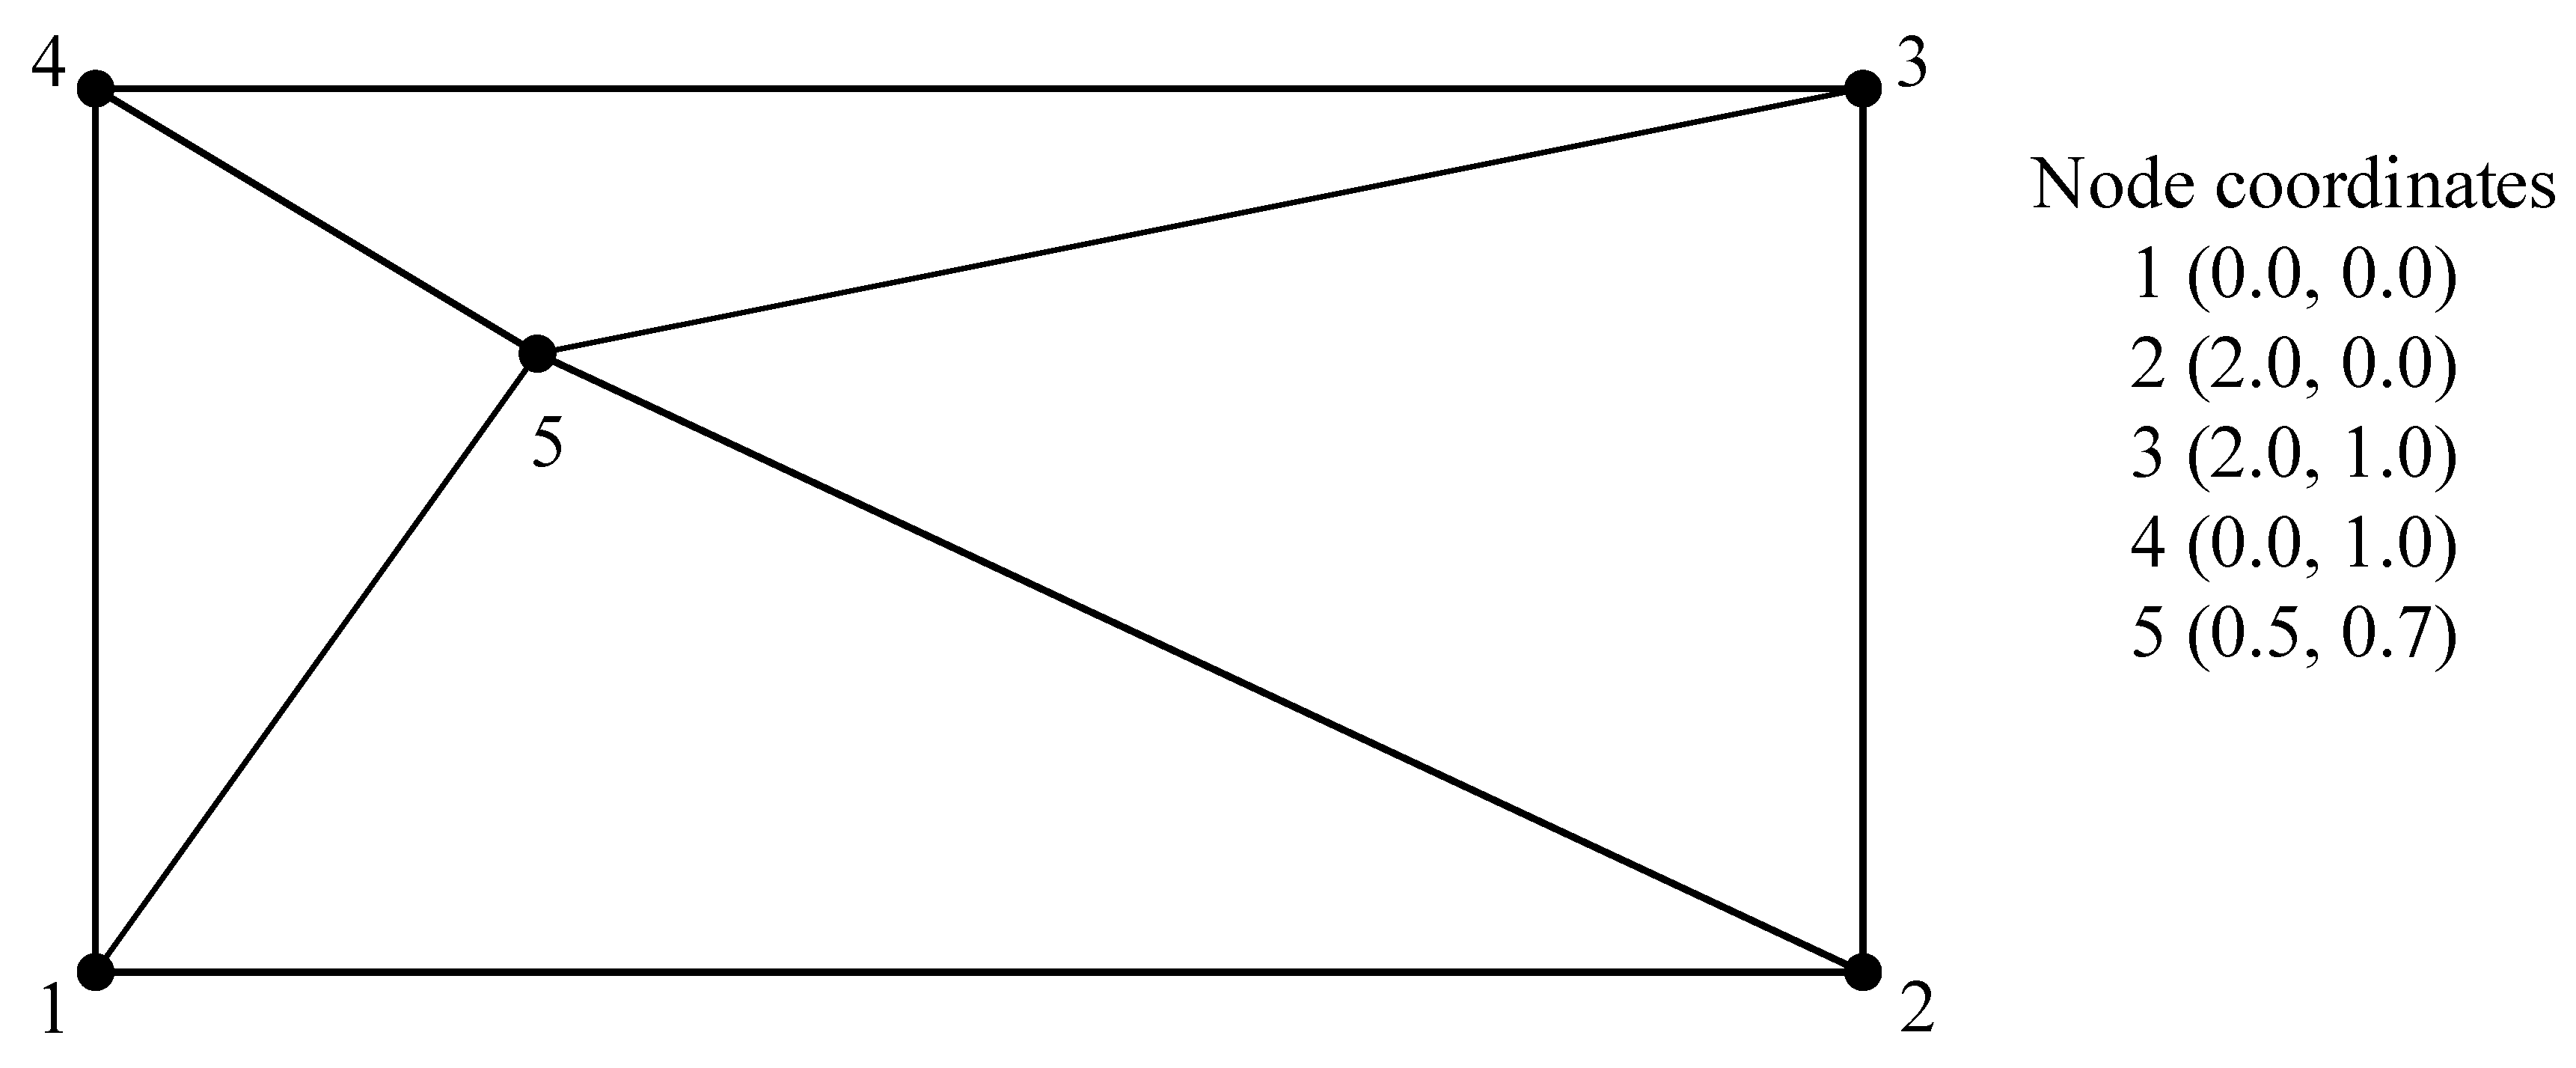 Contour-supported triangular plate